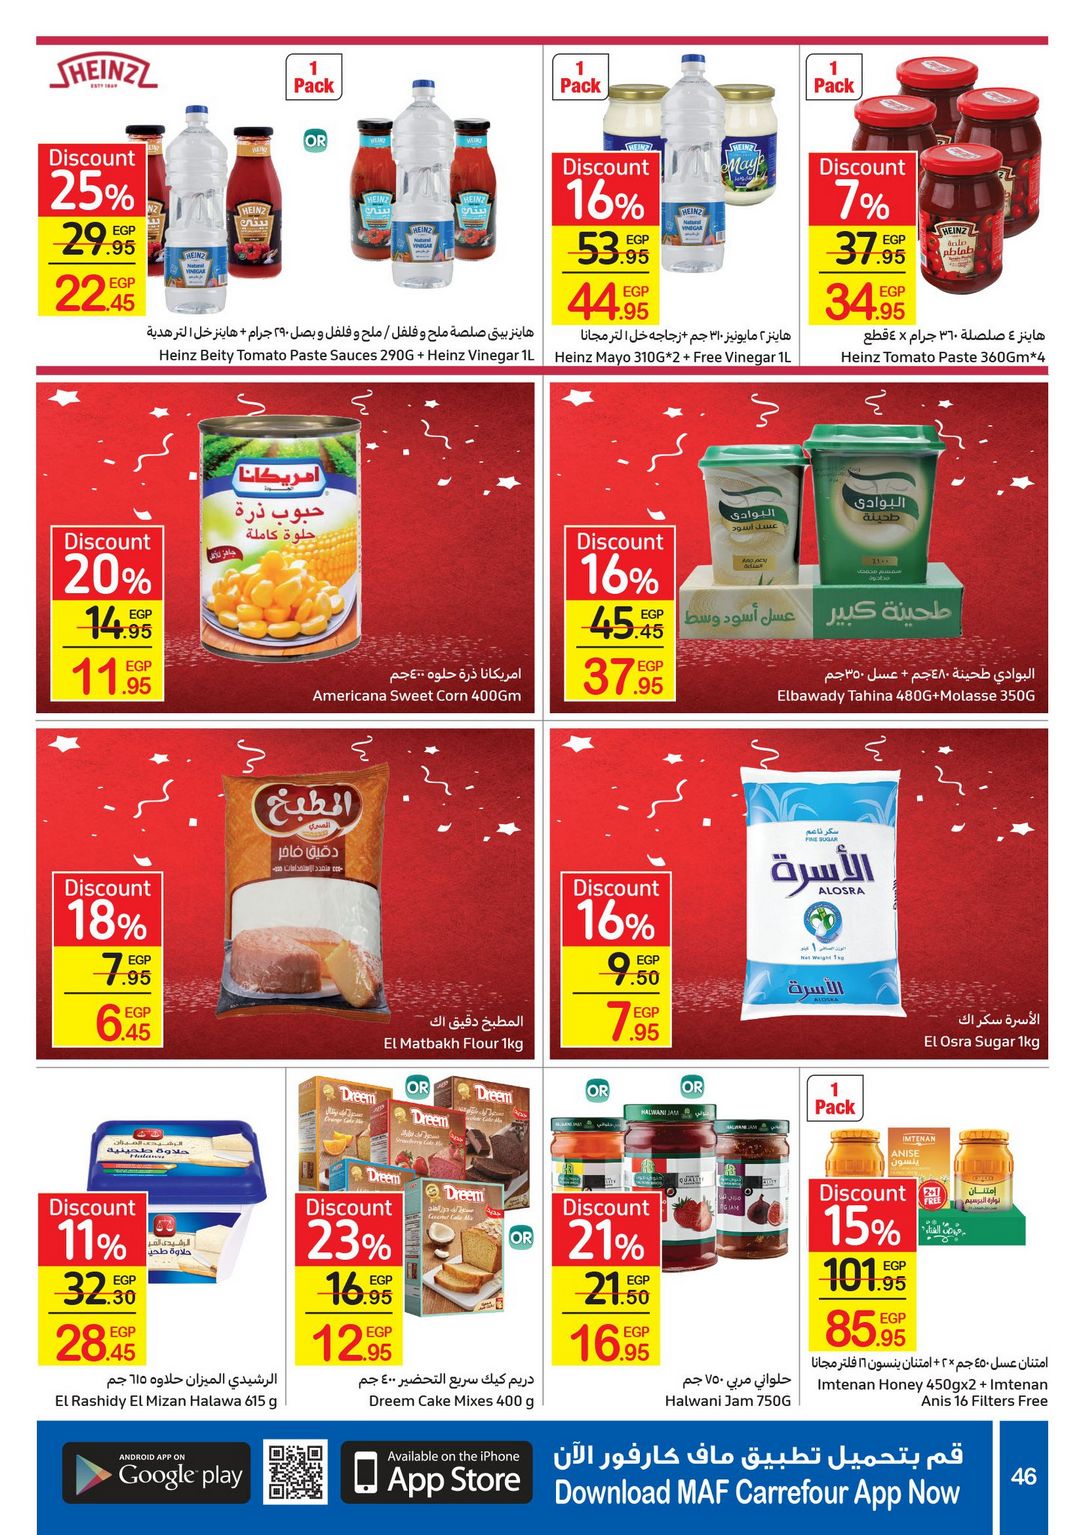 Carrefour Anniversary Offers till 18/2/2021 | Carrefour Egypt 48